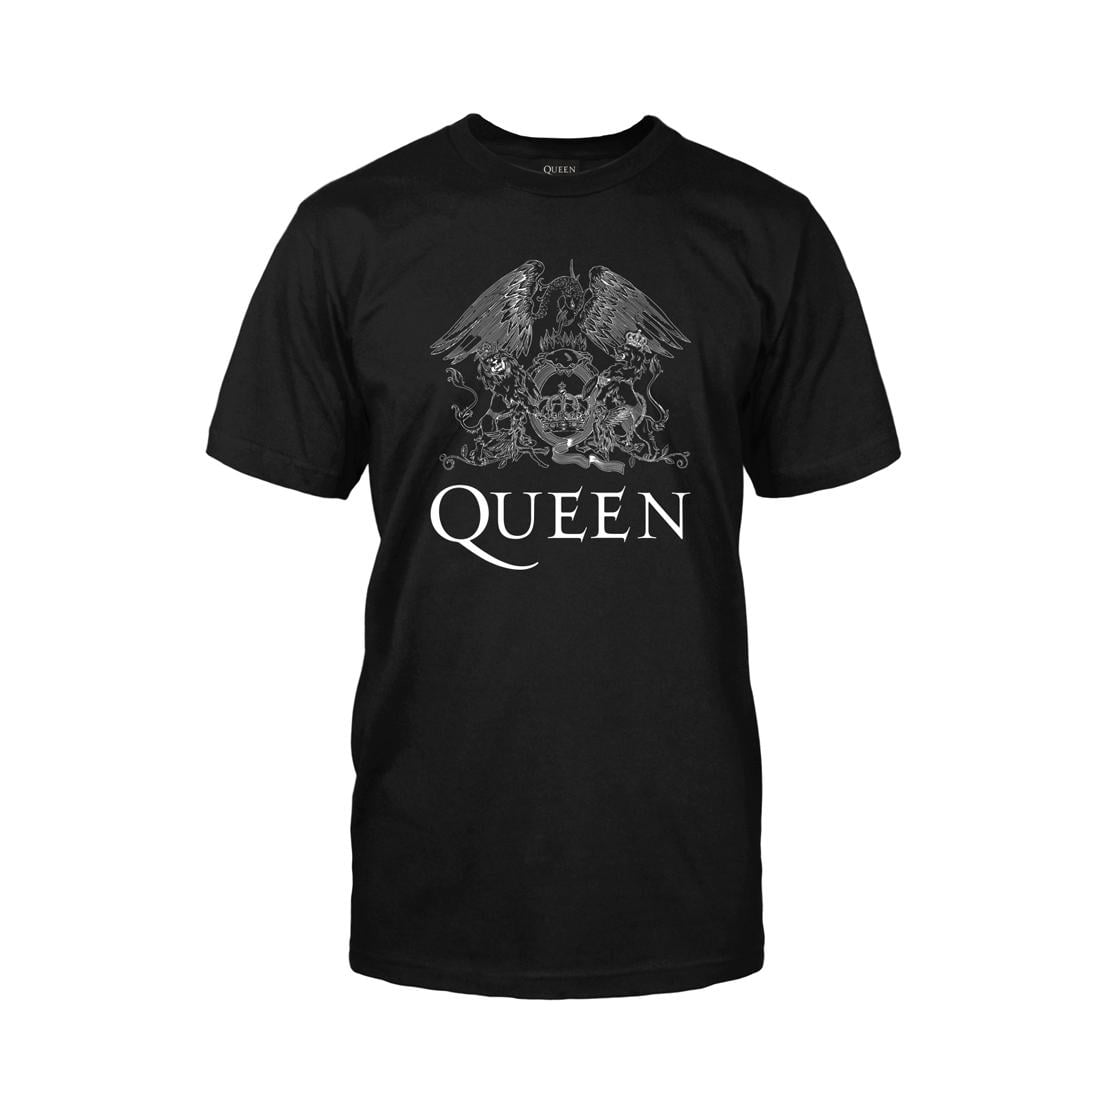 Official Queen Band Black Unisex Short Graphic Tee Sleeve Crest Logo